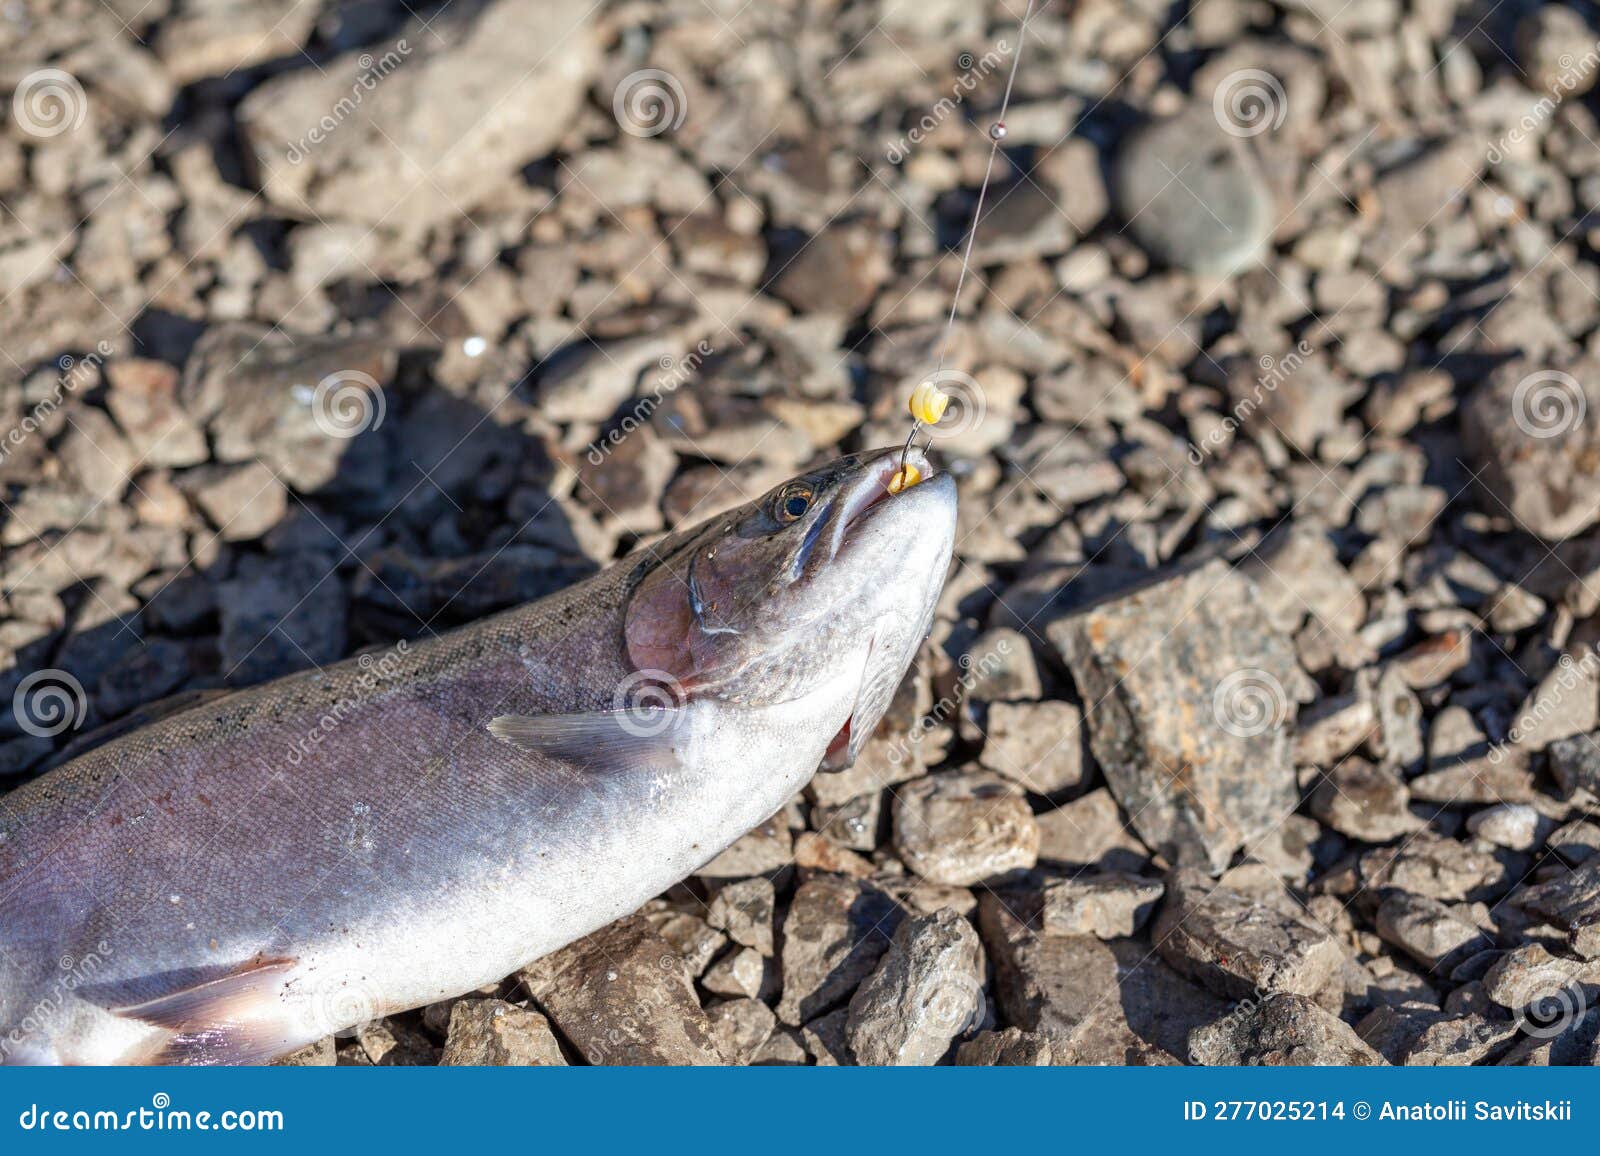 https://thumbs.dreamstime.com/z/fishing-trout-lake-shore-fishing-as-recreation-food-trout-open-season-shore-stream-fishing-fish-trout-open-season-nature-277025214.jpg